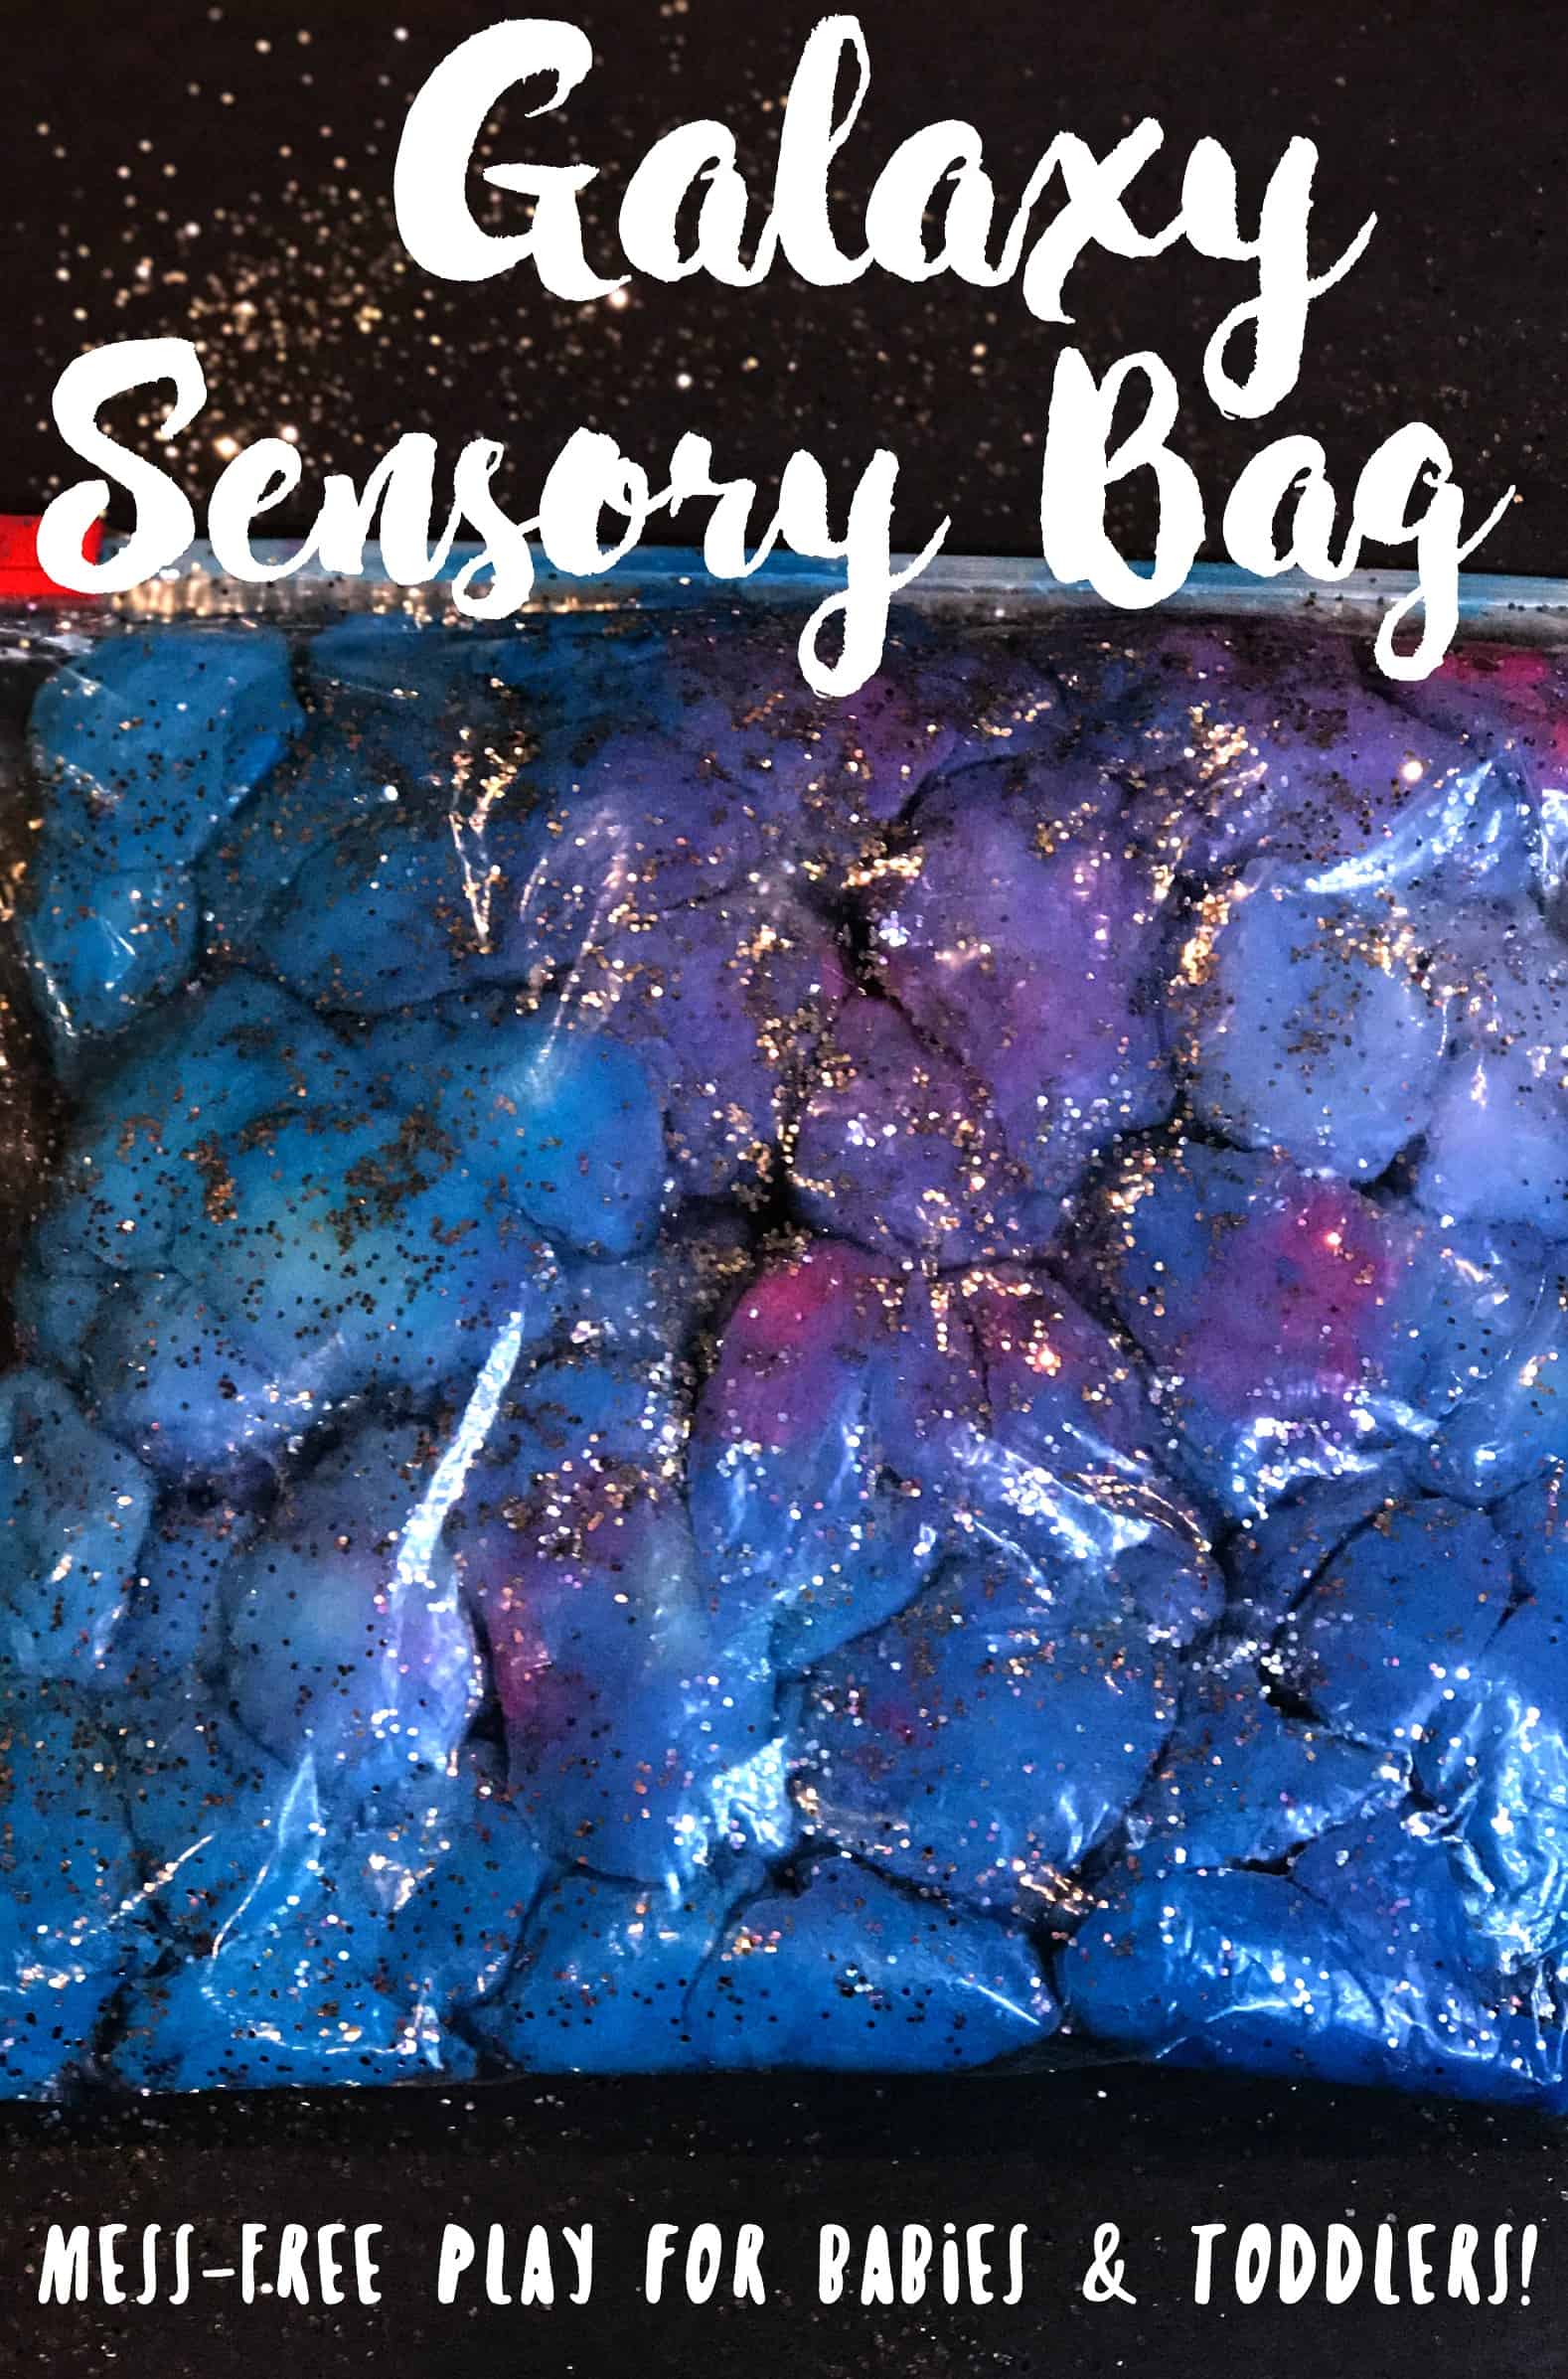 This space sensory bag is like a galaxy or a nebula that kids can hold in their hands and squish! A mess-free sensory experience for babies and toddlers.